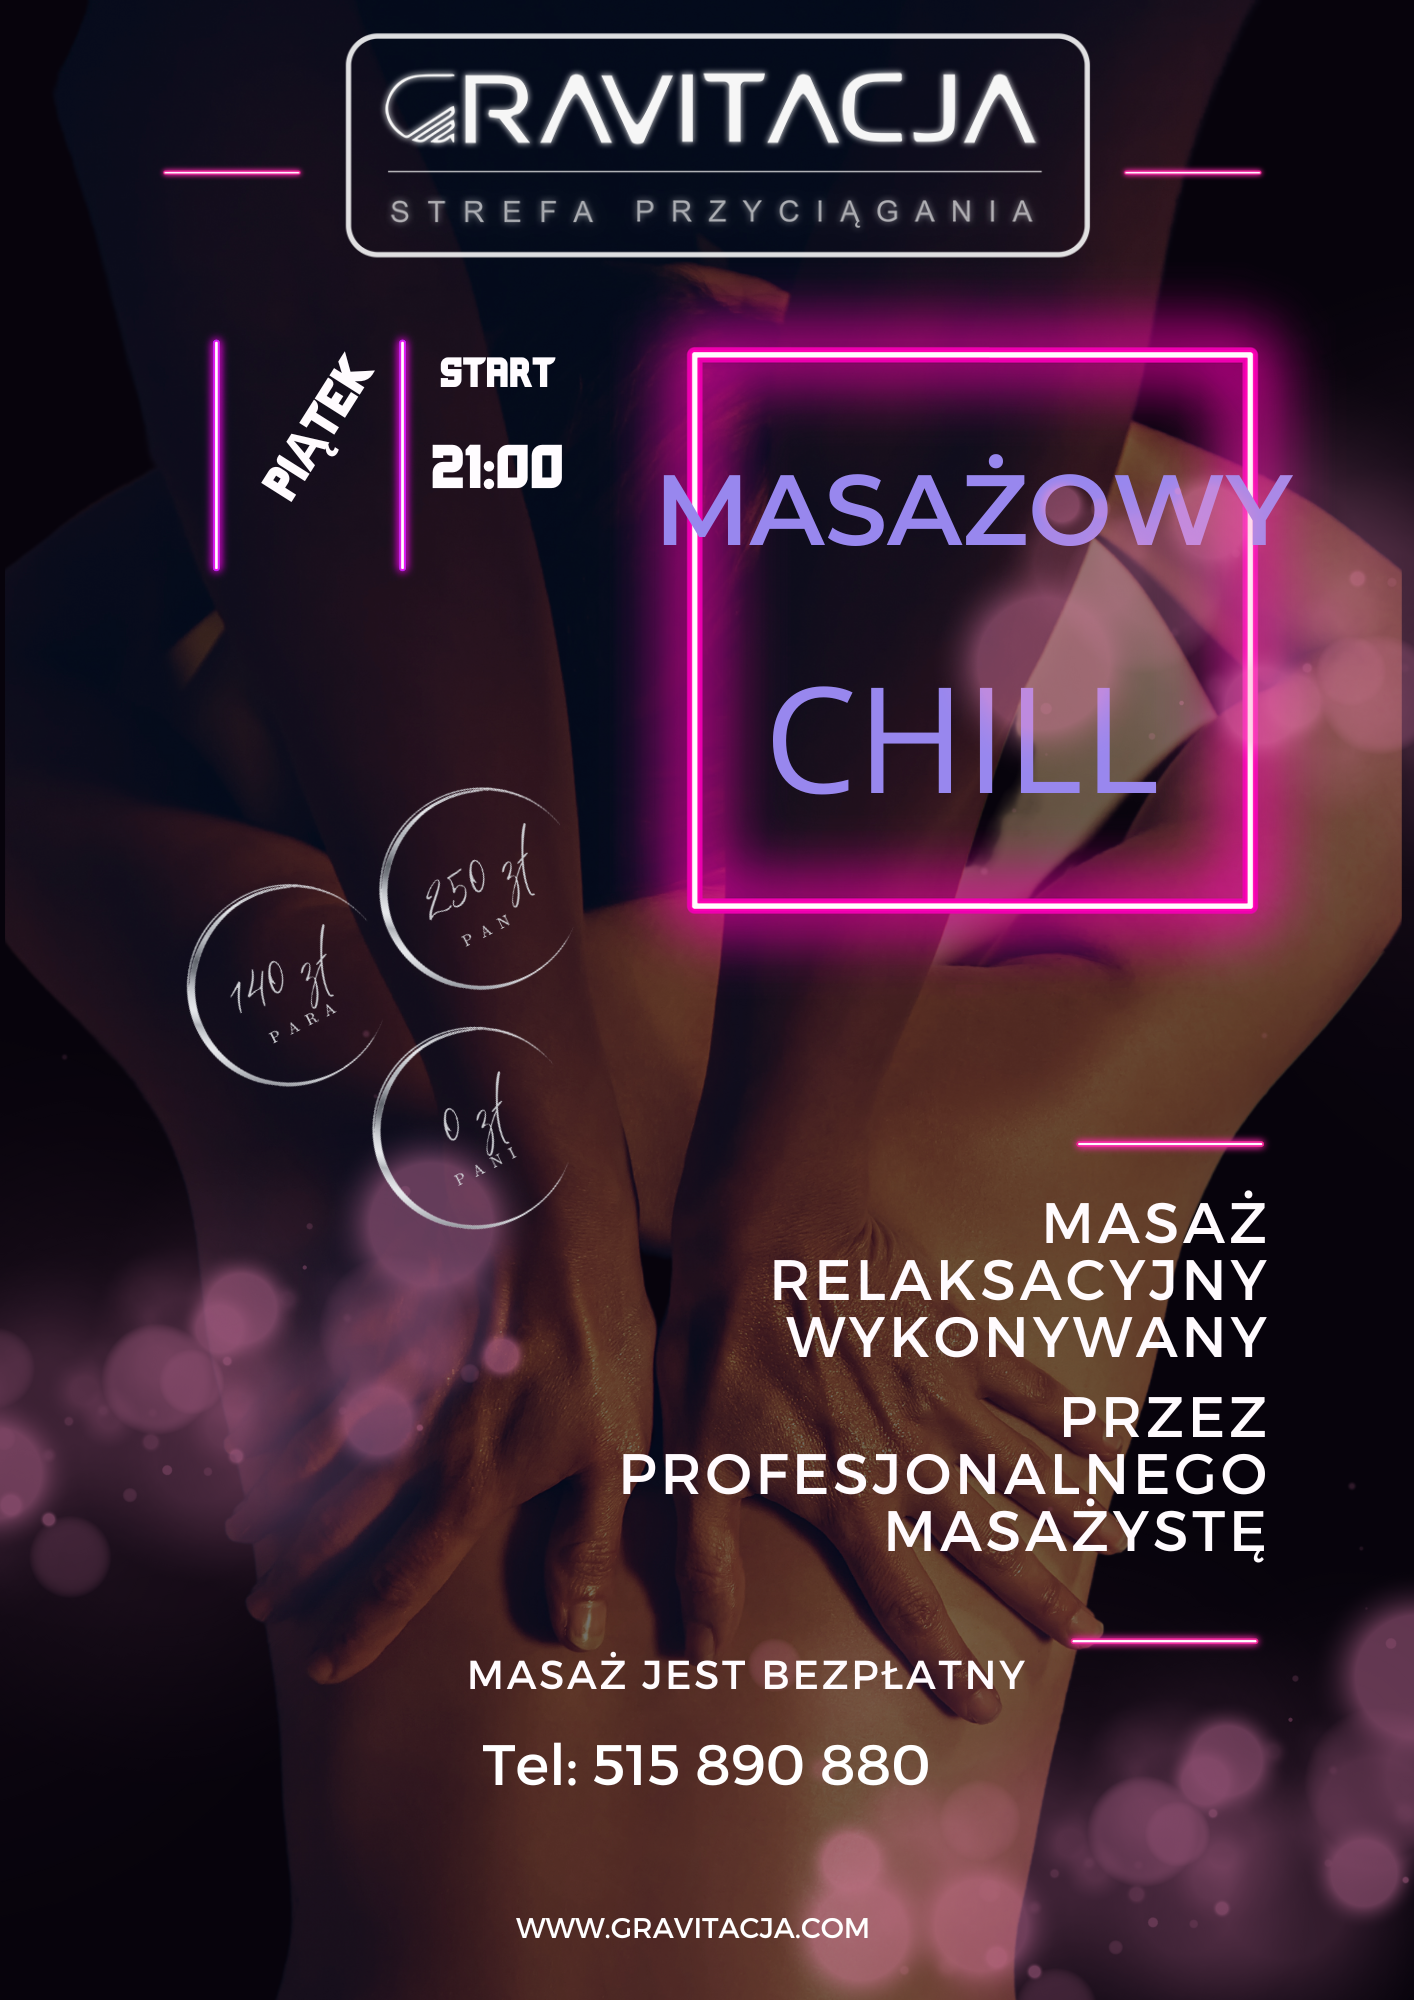 Masażowy Chill # 24.05